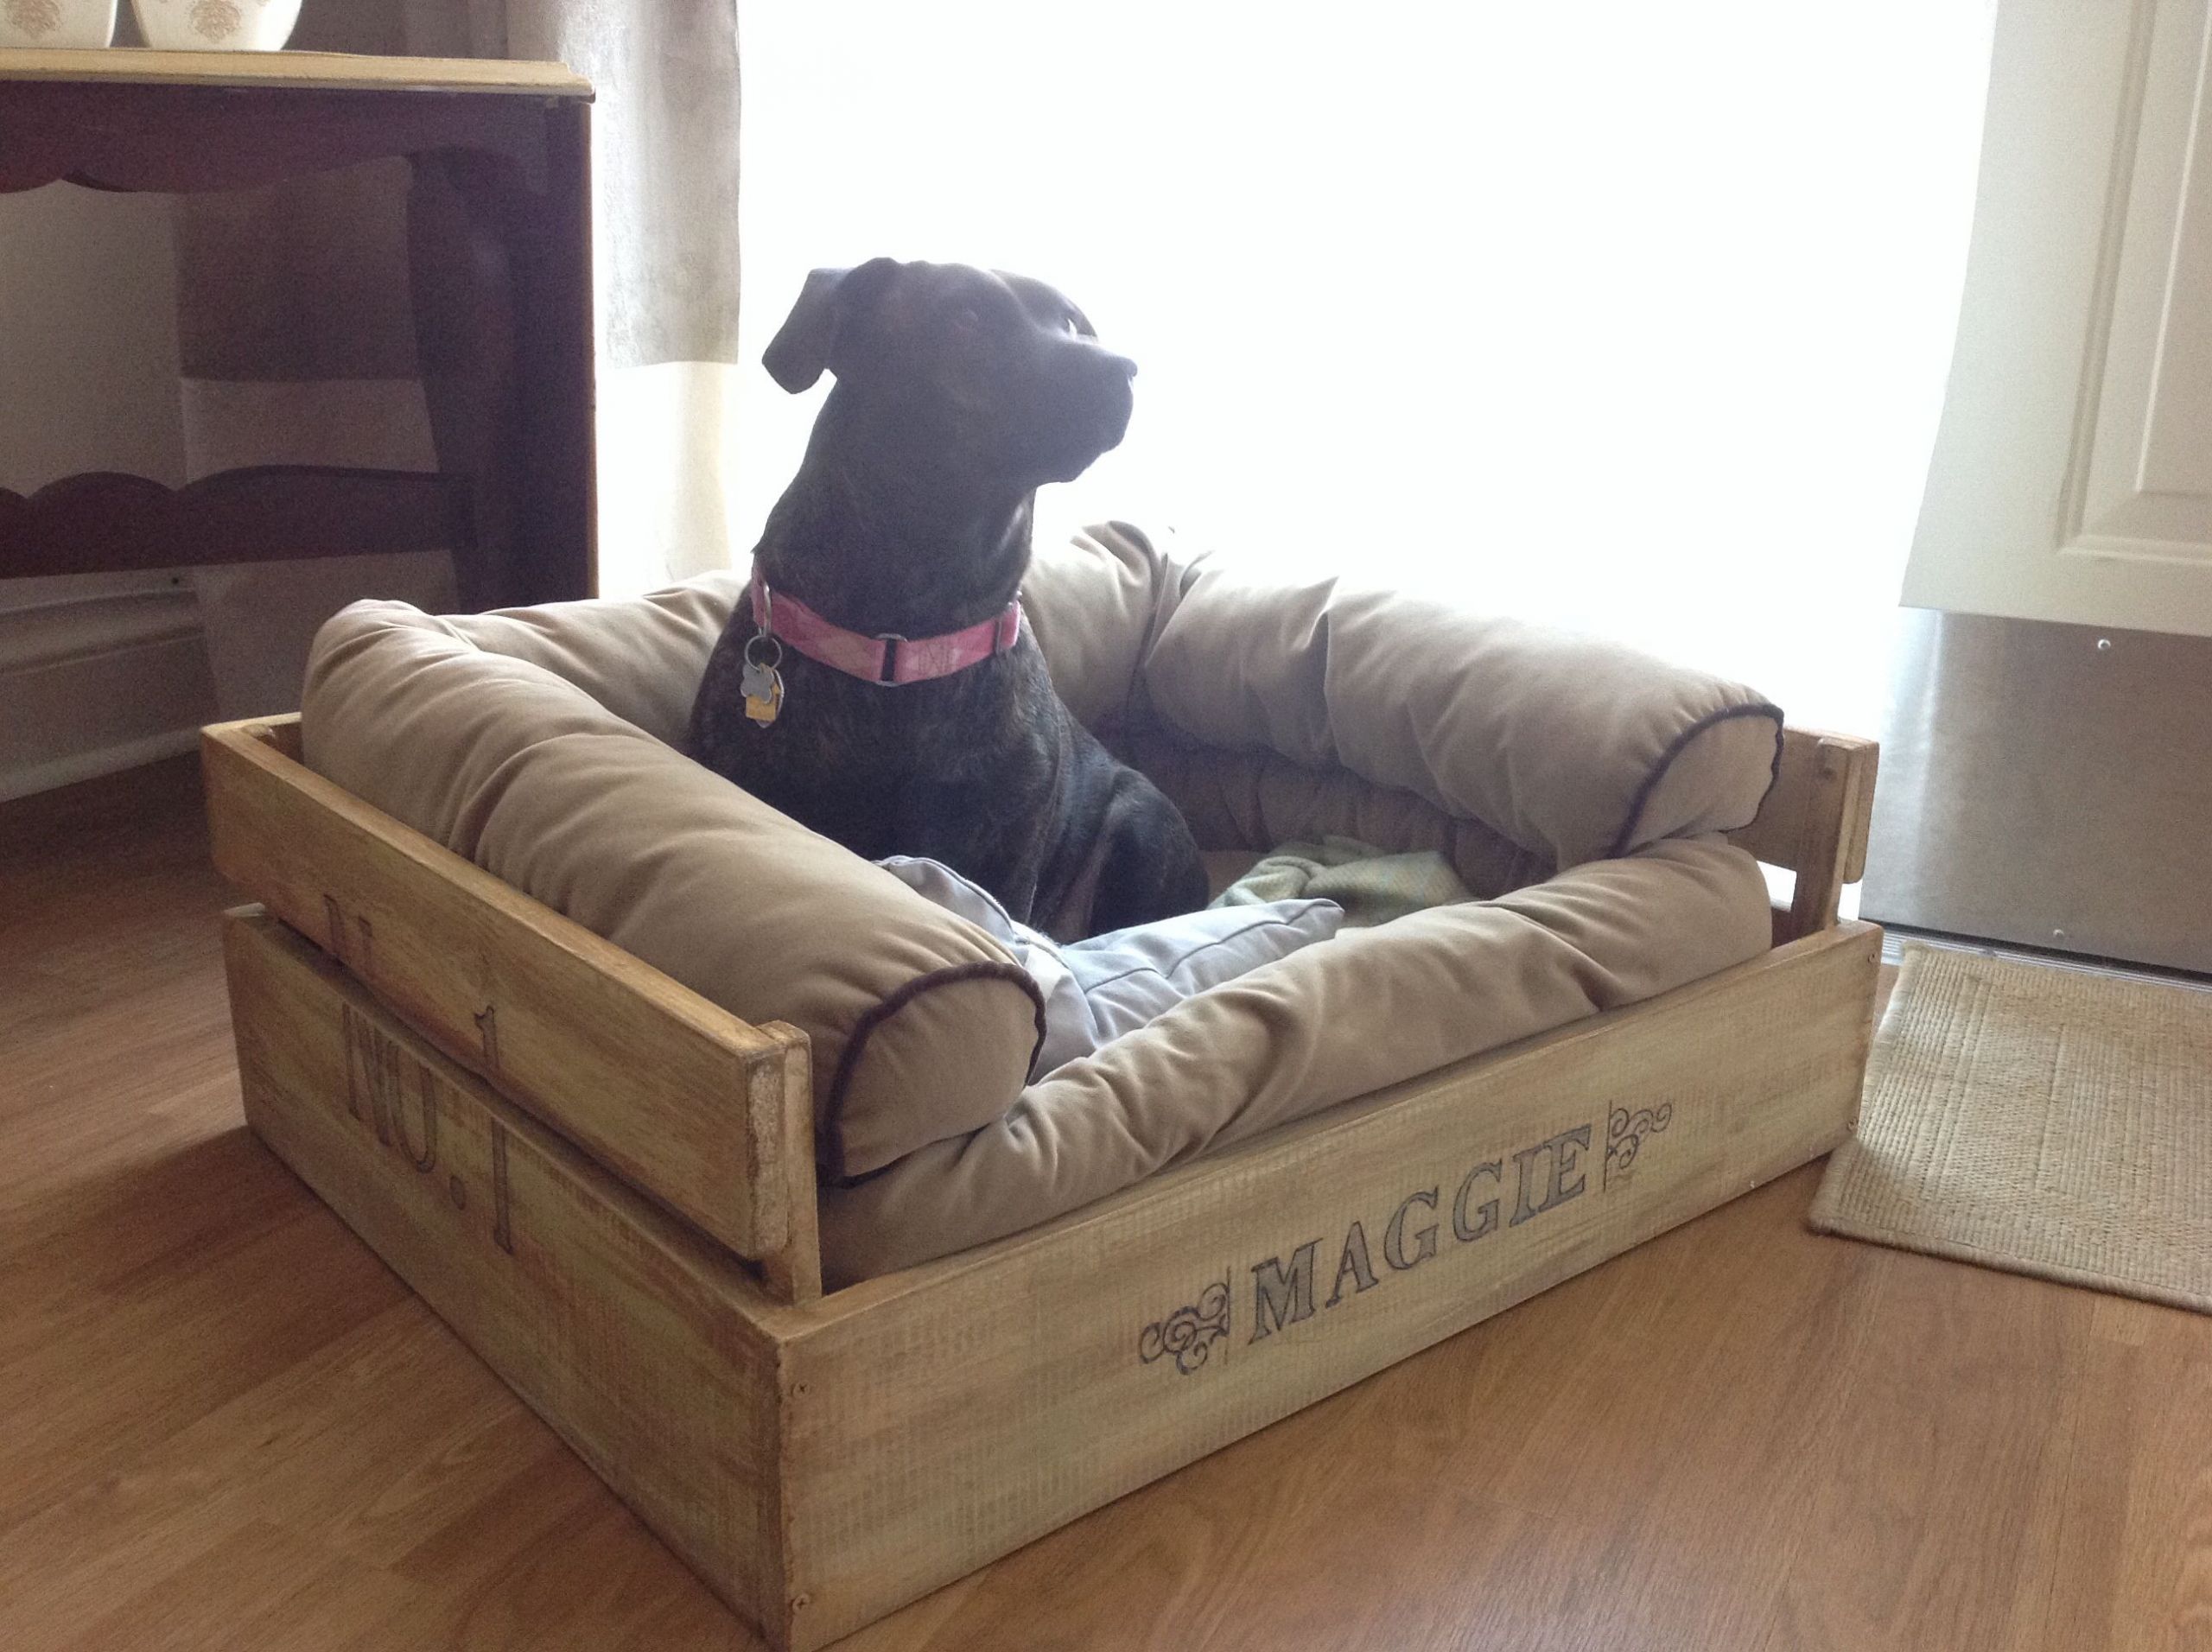 DIY Dog Crate Bed
 DIY fy crate dog bed Just write the name on with a